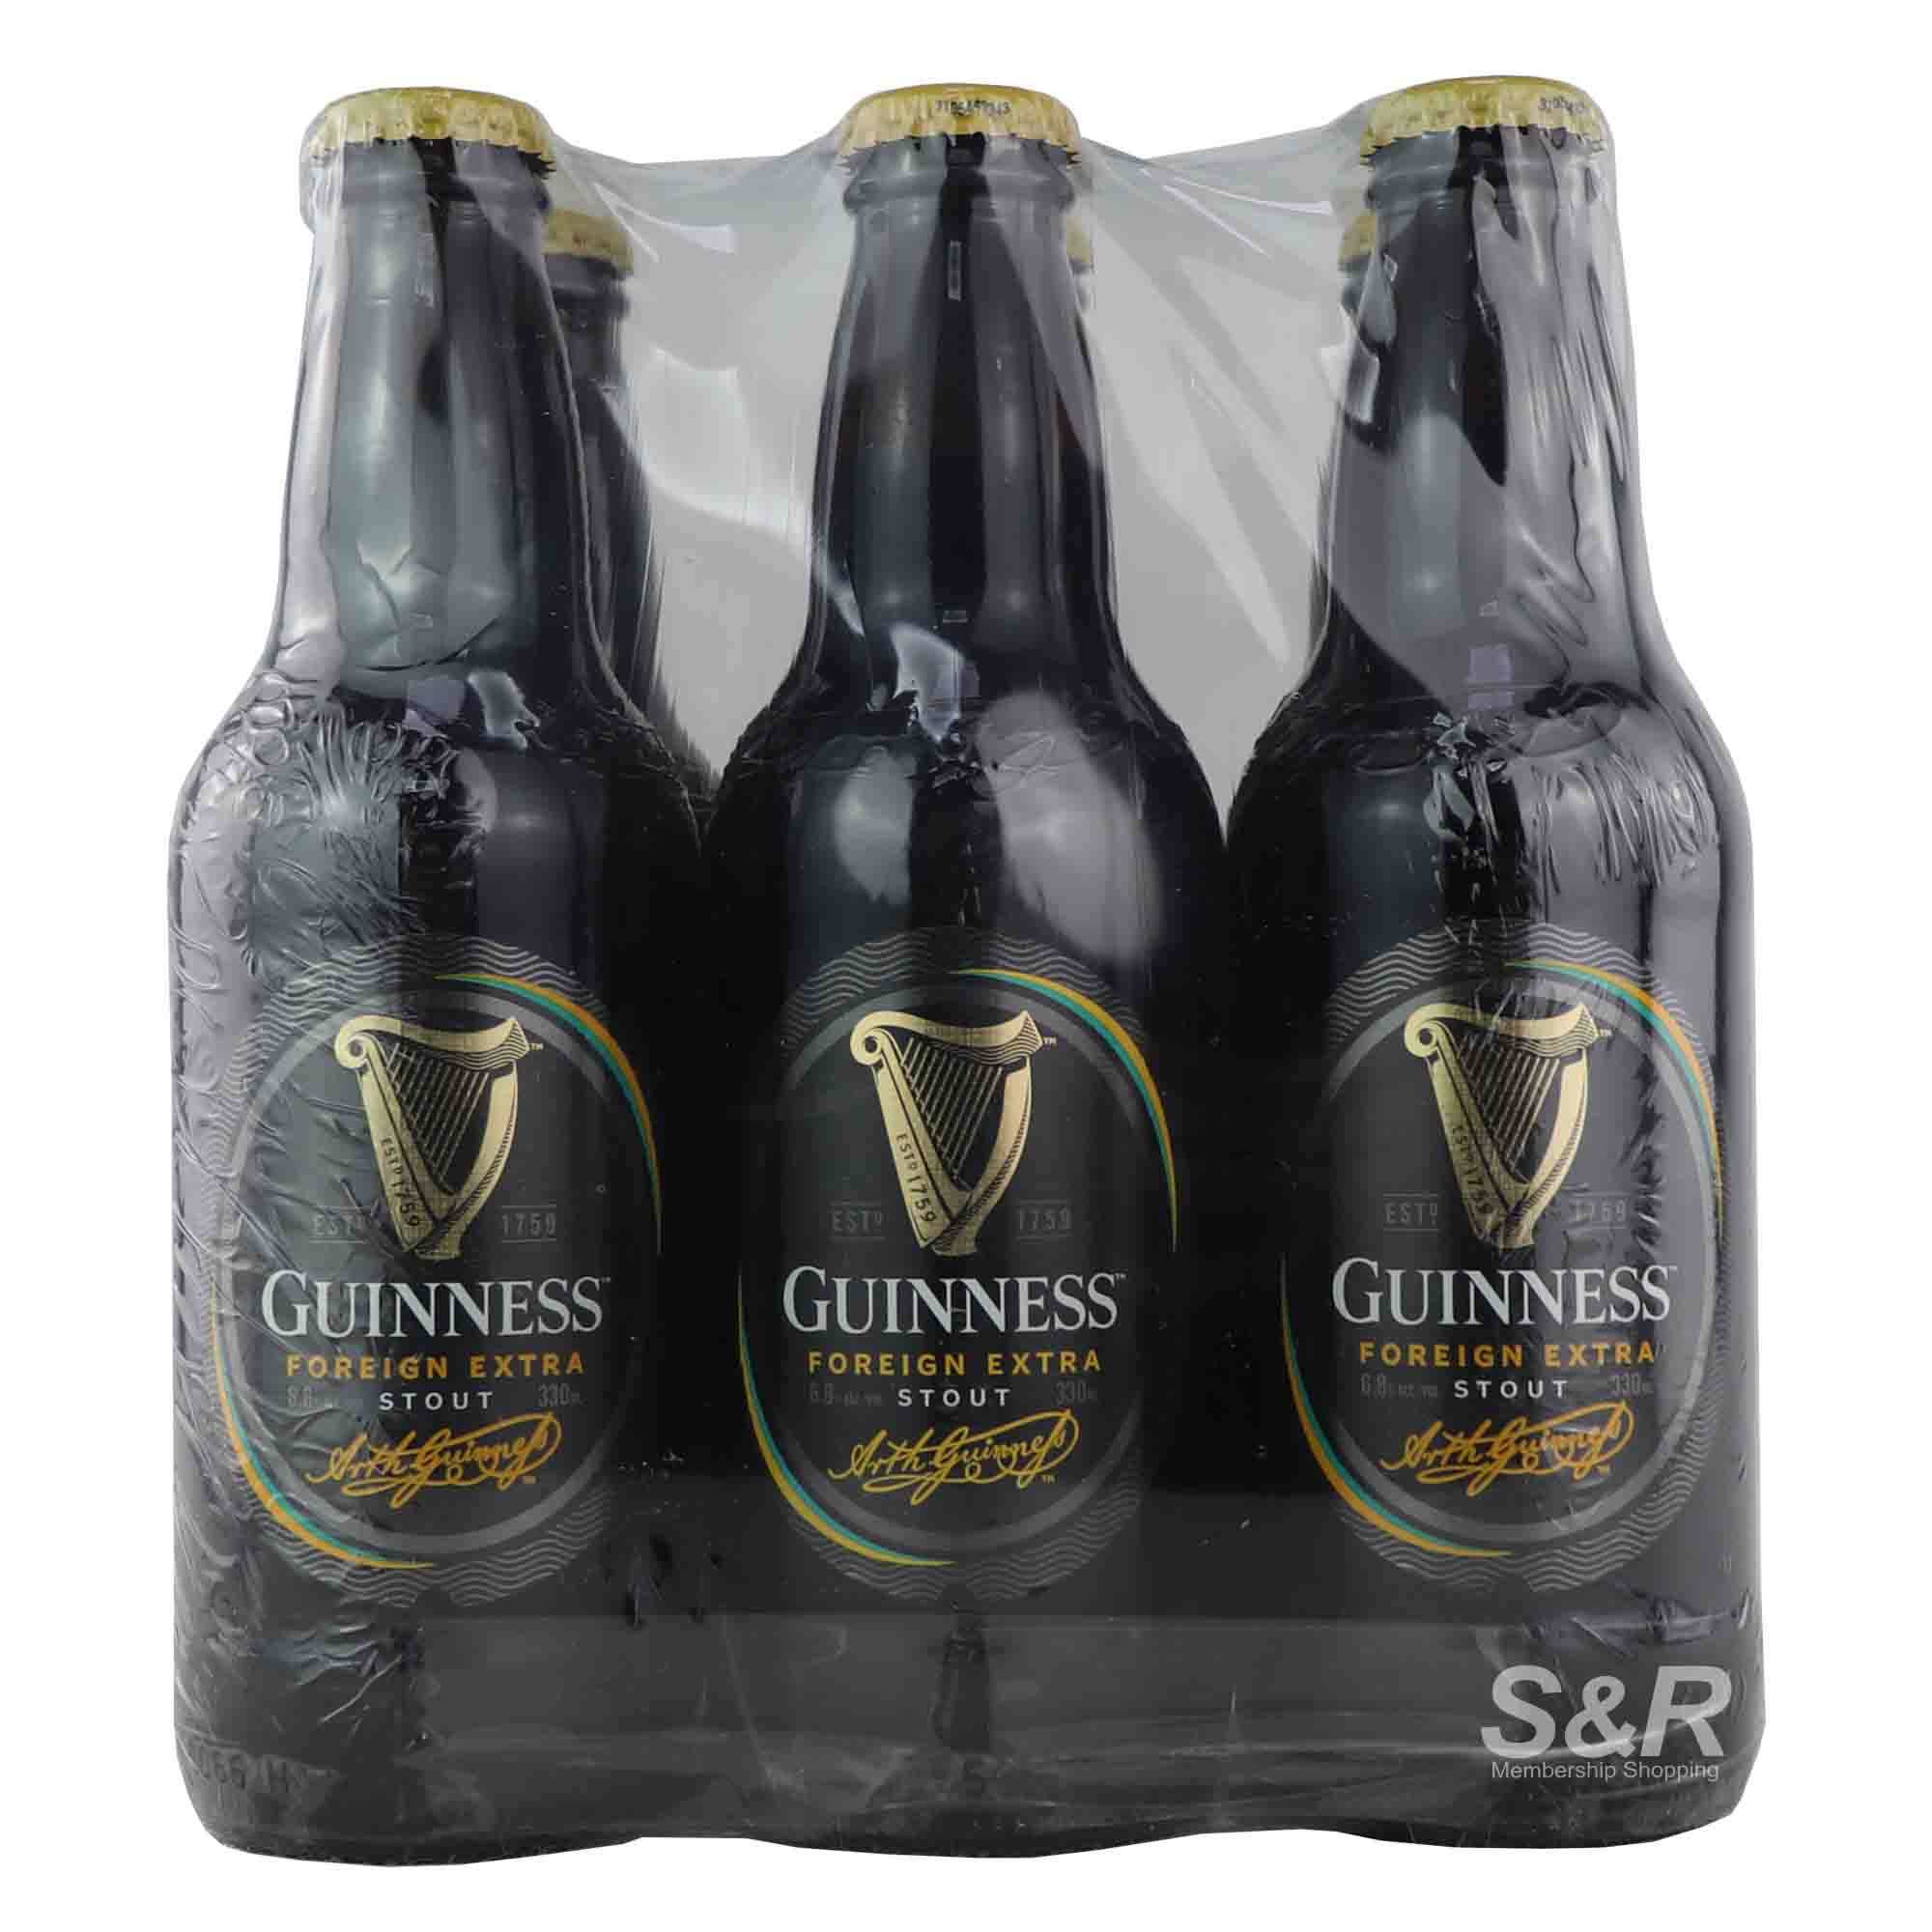 Guinness Foreign Extra Stout Beer (330mL x 6pcs)